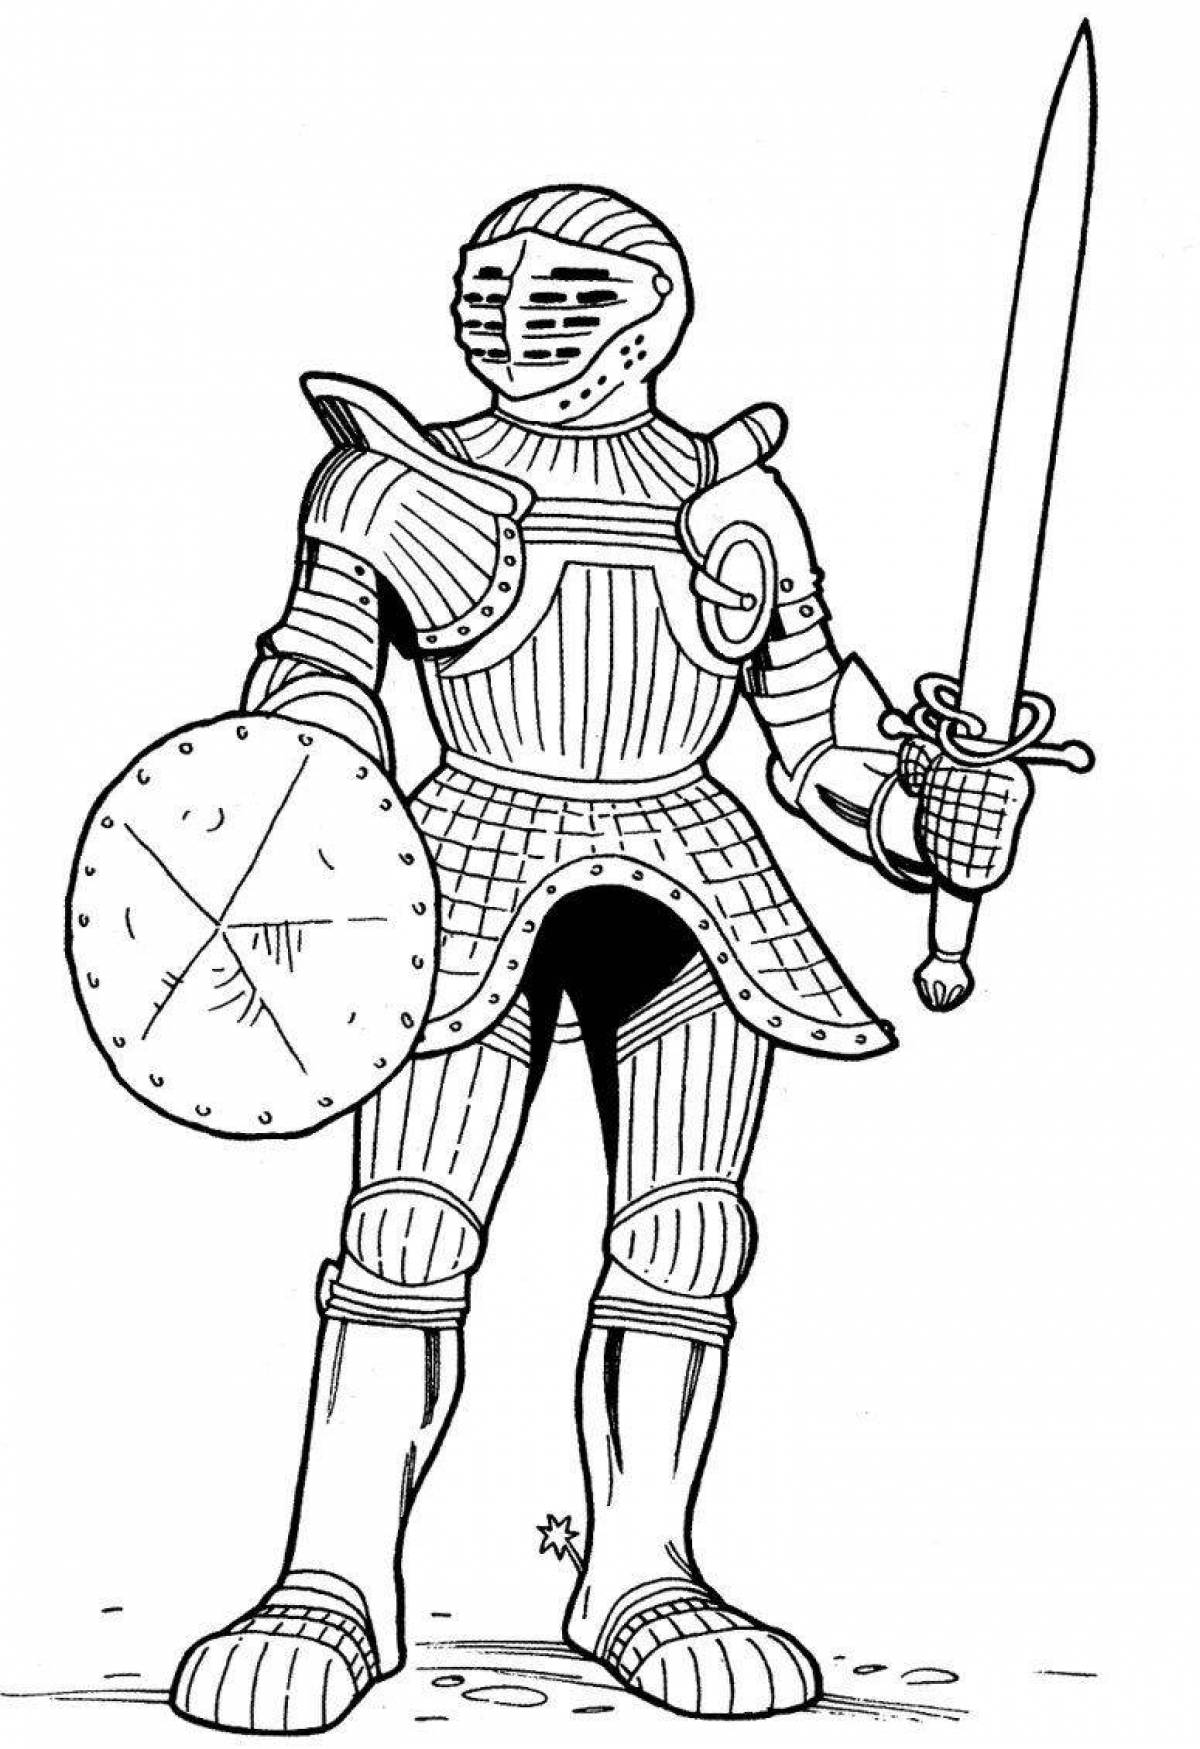 Coloring pages majestic medieval knights